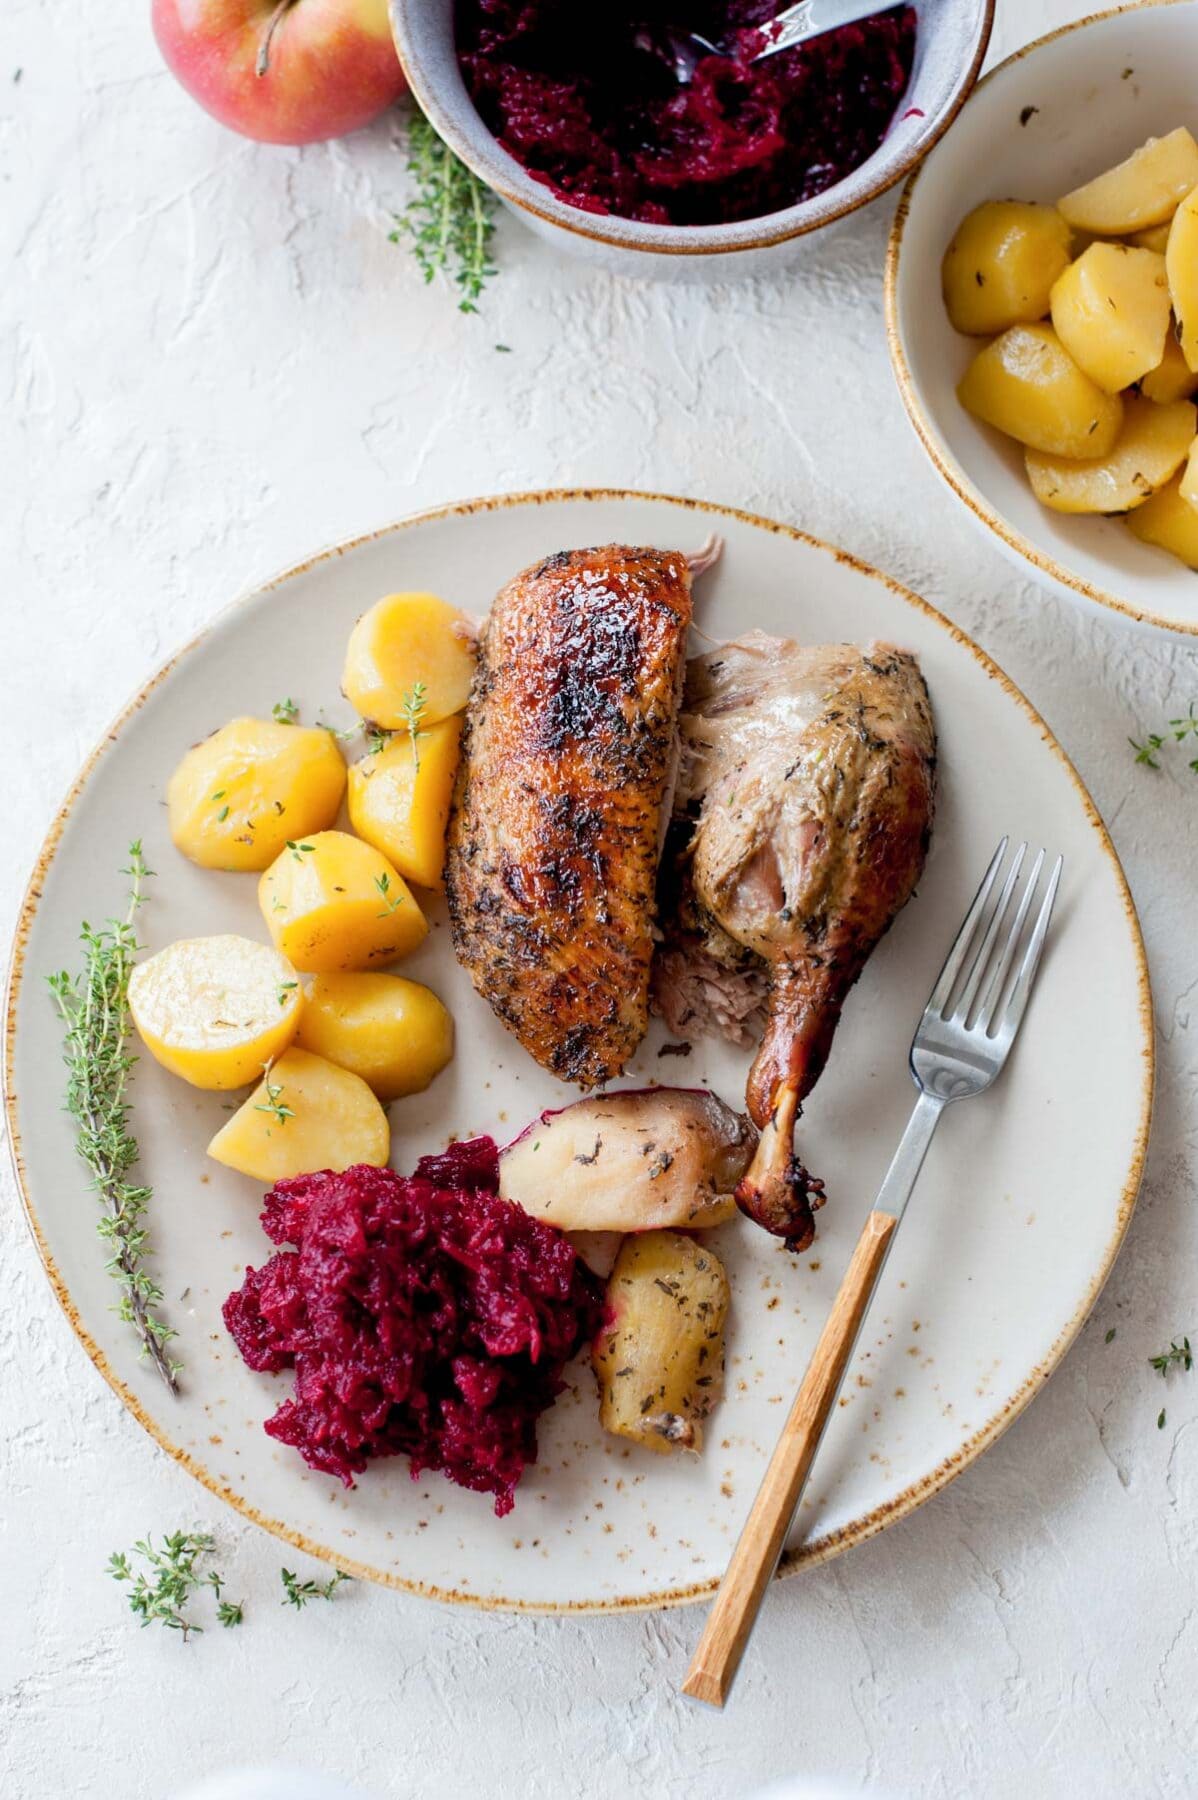 Roasted duck breast and leg, potatoes, apples, and beet salad on a beige plate.